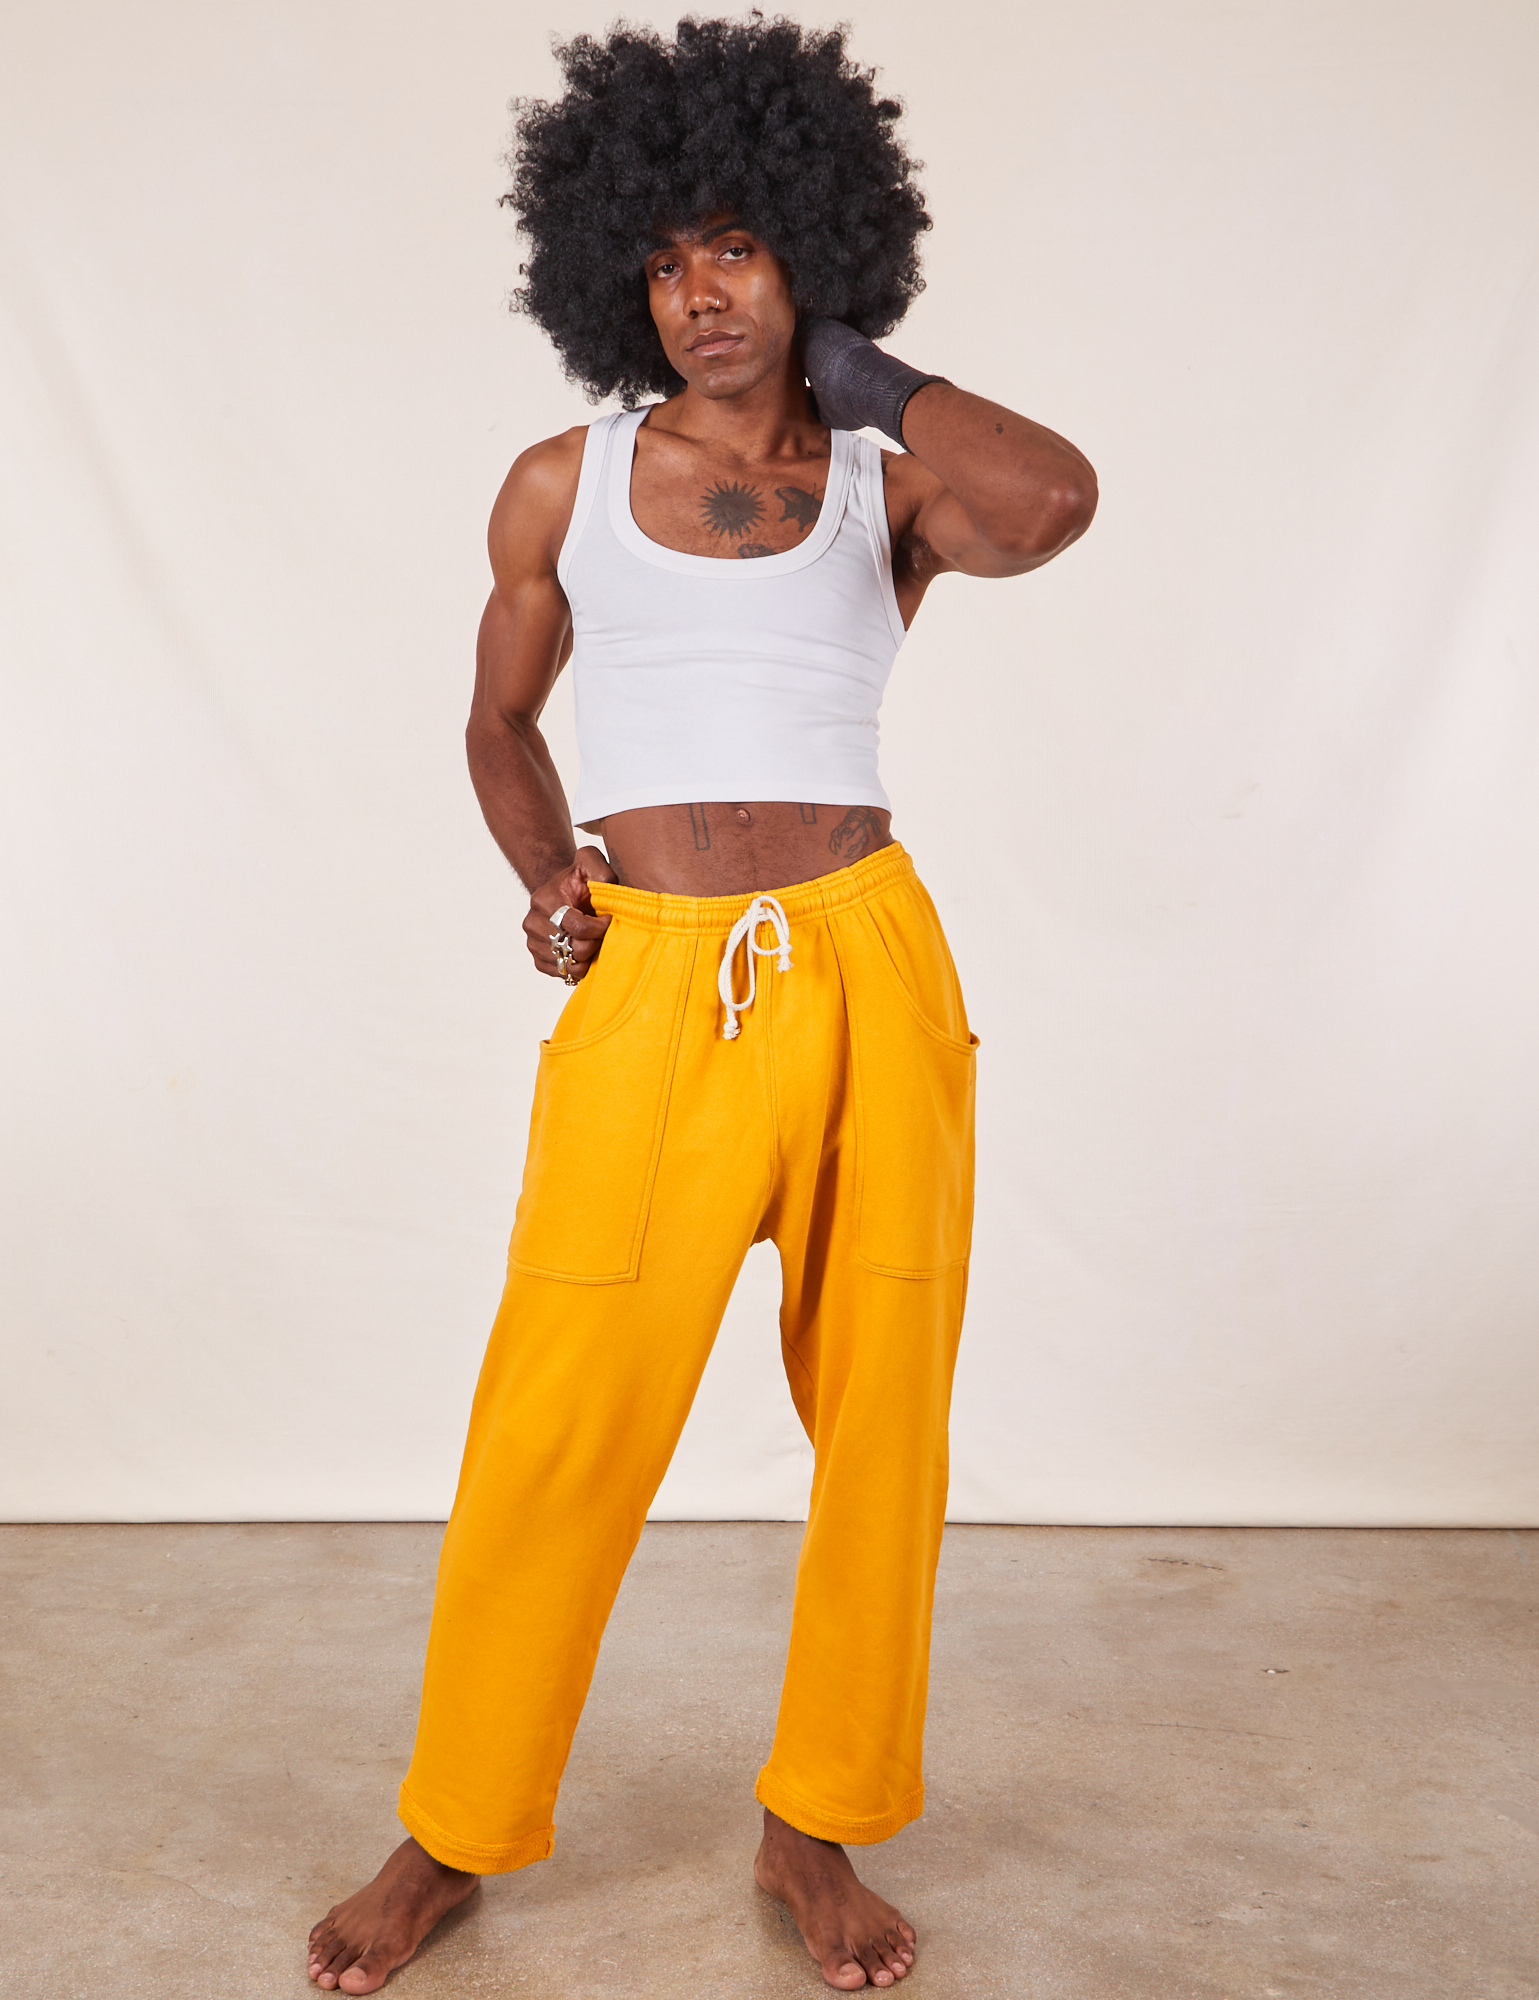 Jerrod is 6&#39;3&quot; and wearing M Cropped Rolled Cuff Sweatpants in Mustard Yellow paired with vintage off-white Cropped Tank Top